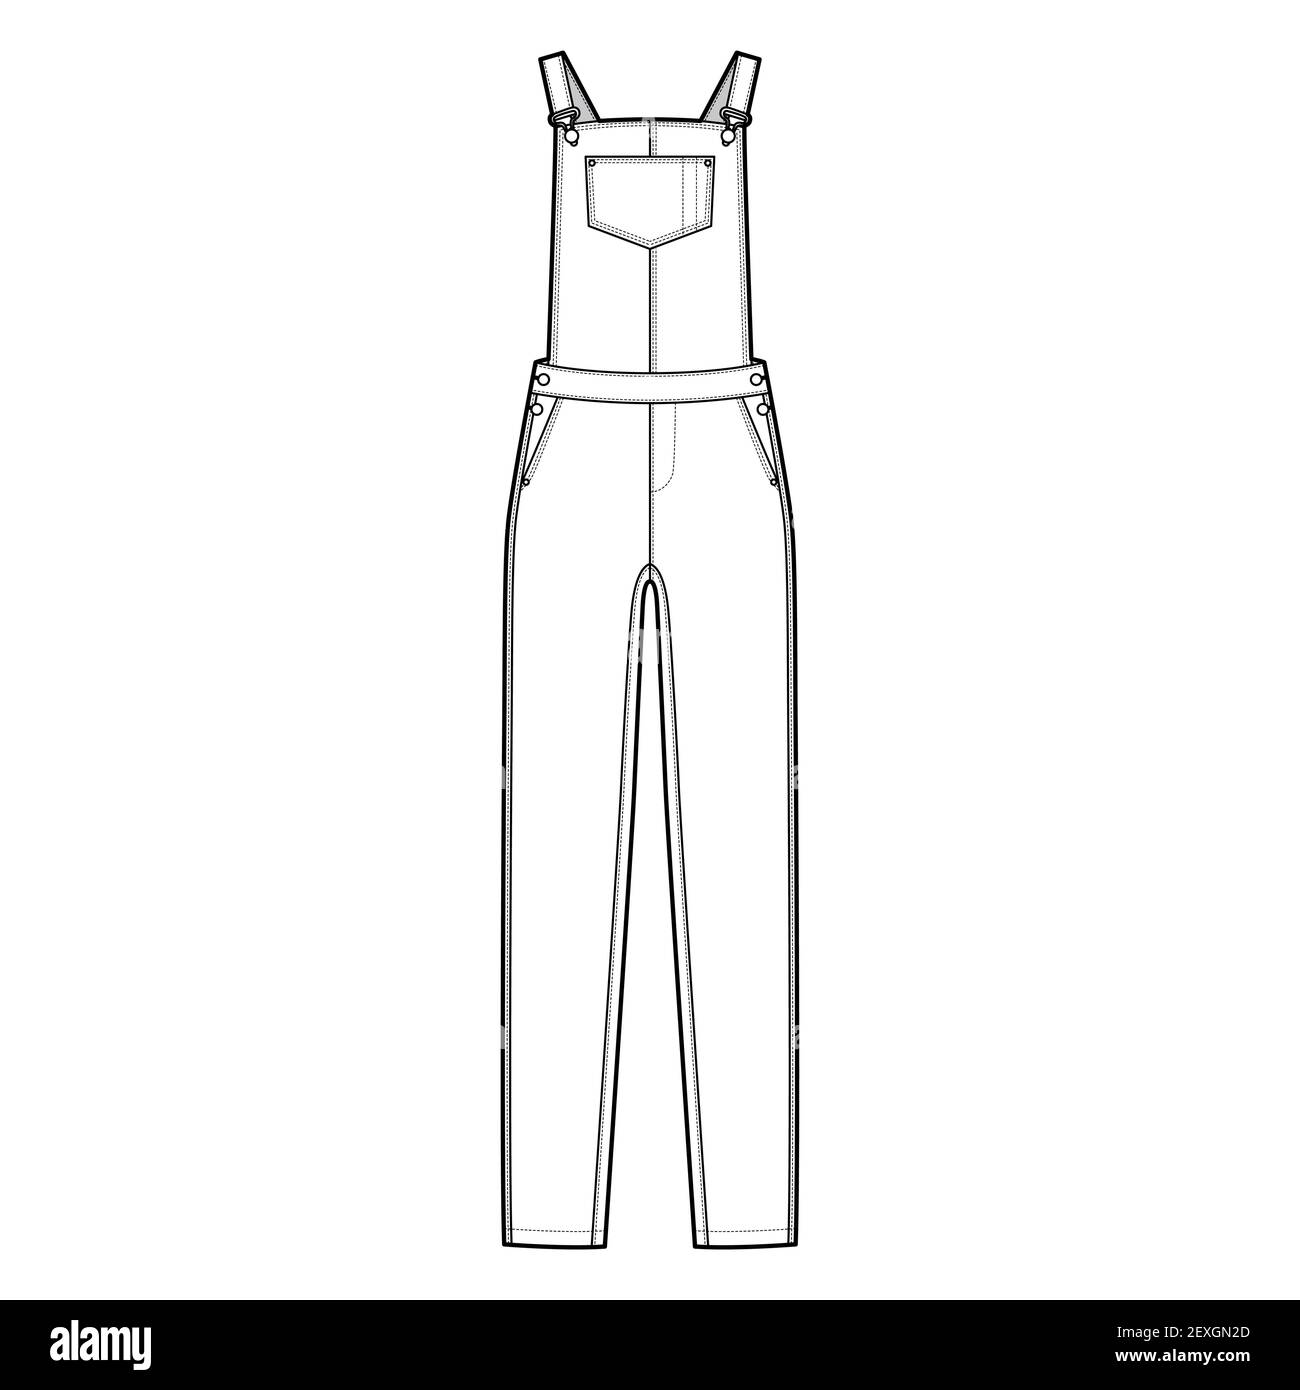 Download Dungaree Denim Overall Jumpsuit Technical Fashion Illustration With Full Floor Length Normal Waist High Rise Pockets Rivets Flat Apparel Front White Color Style Women Men Unisex Cad Mockup Stock Vector Image